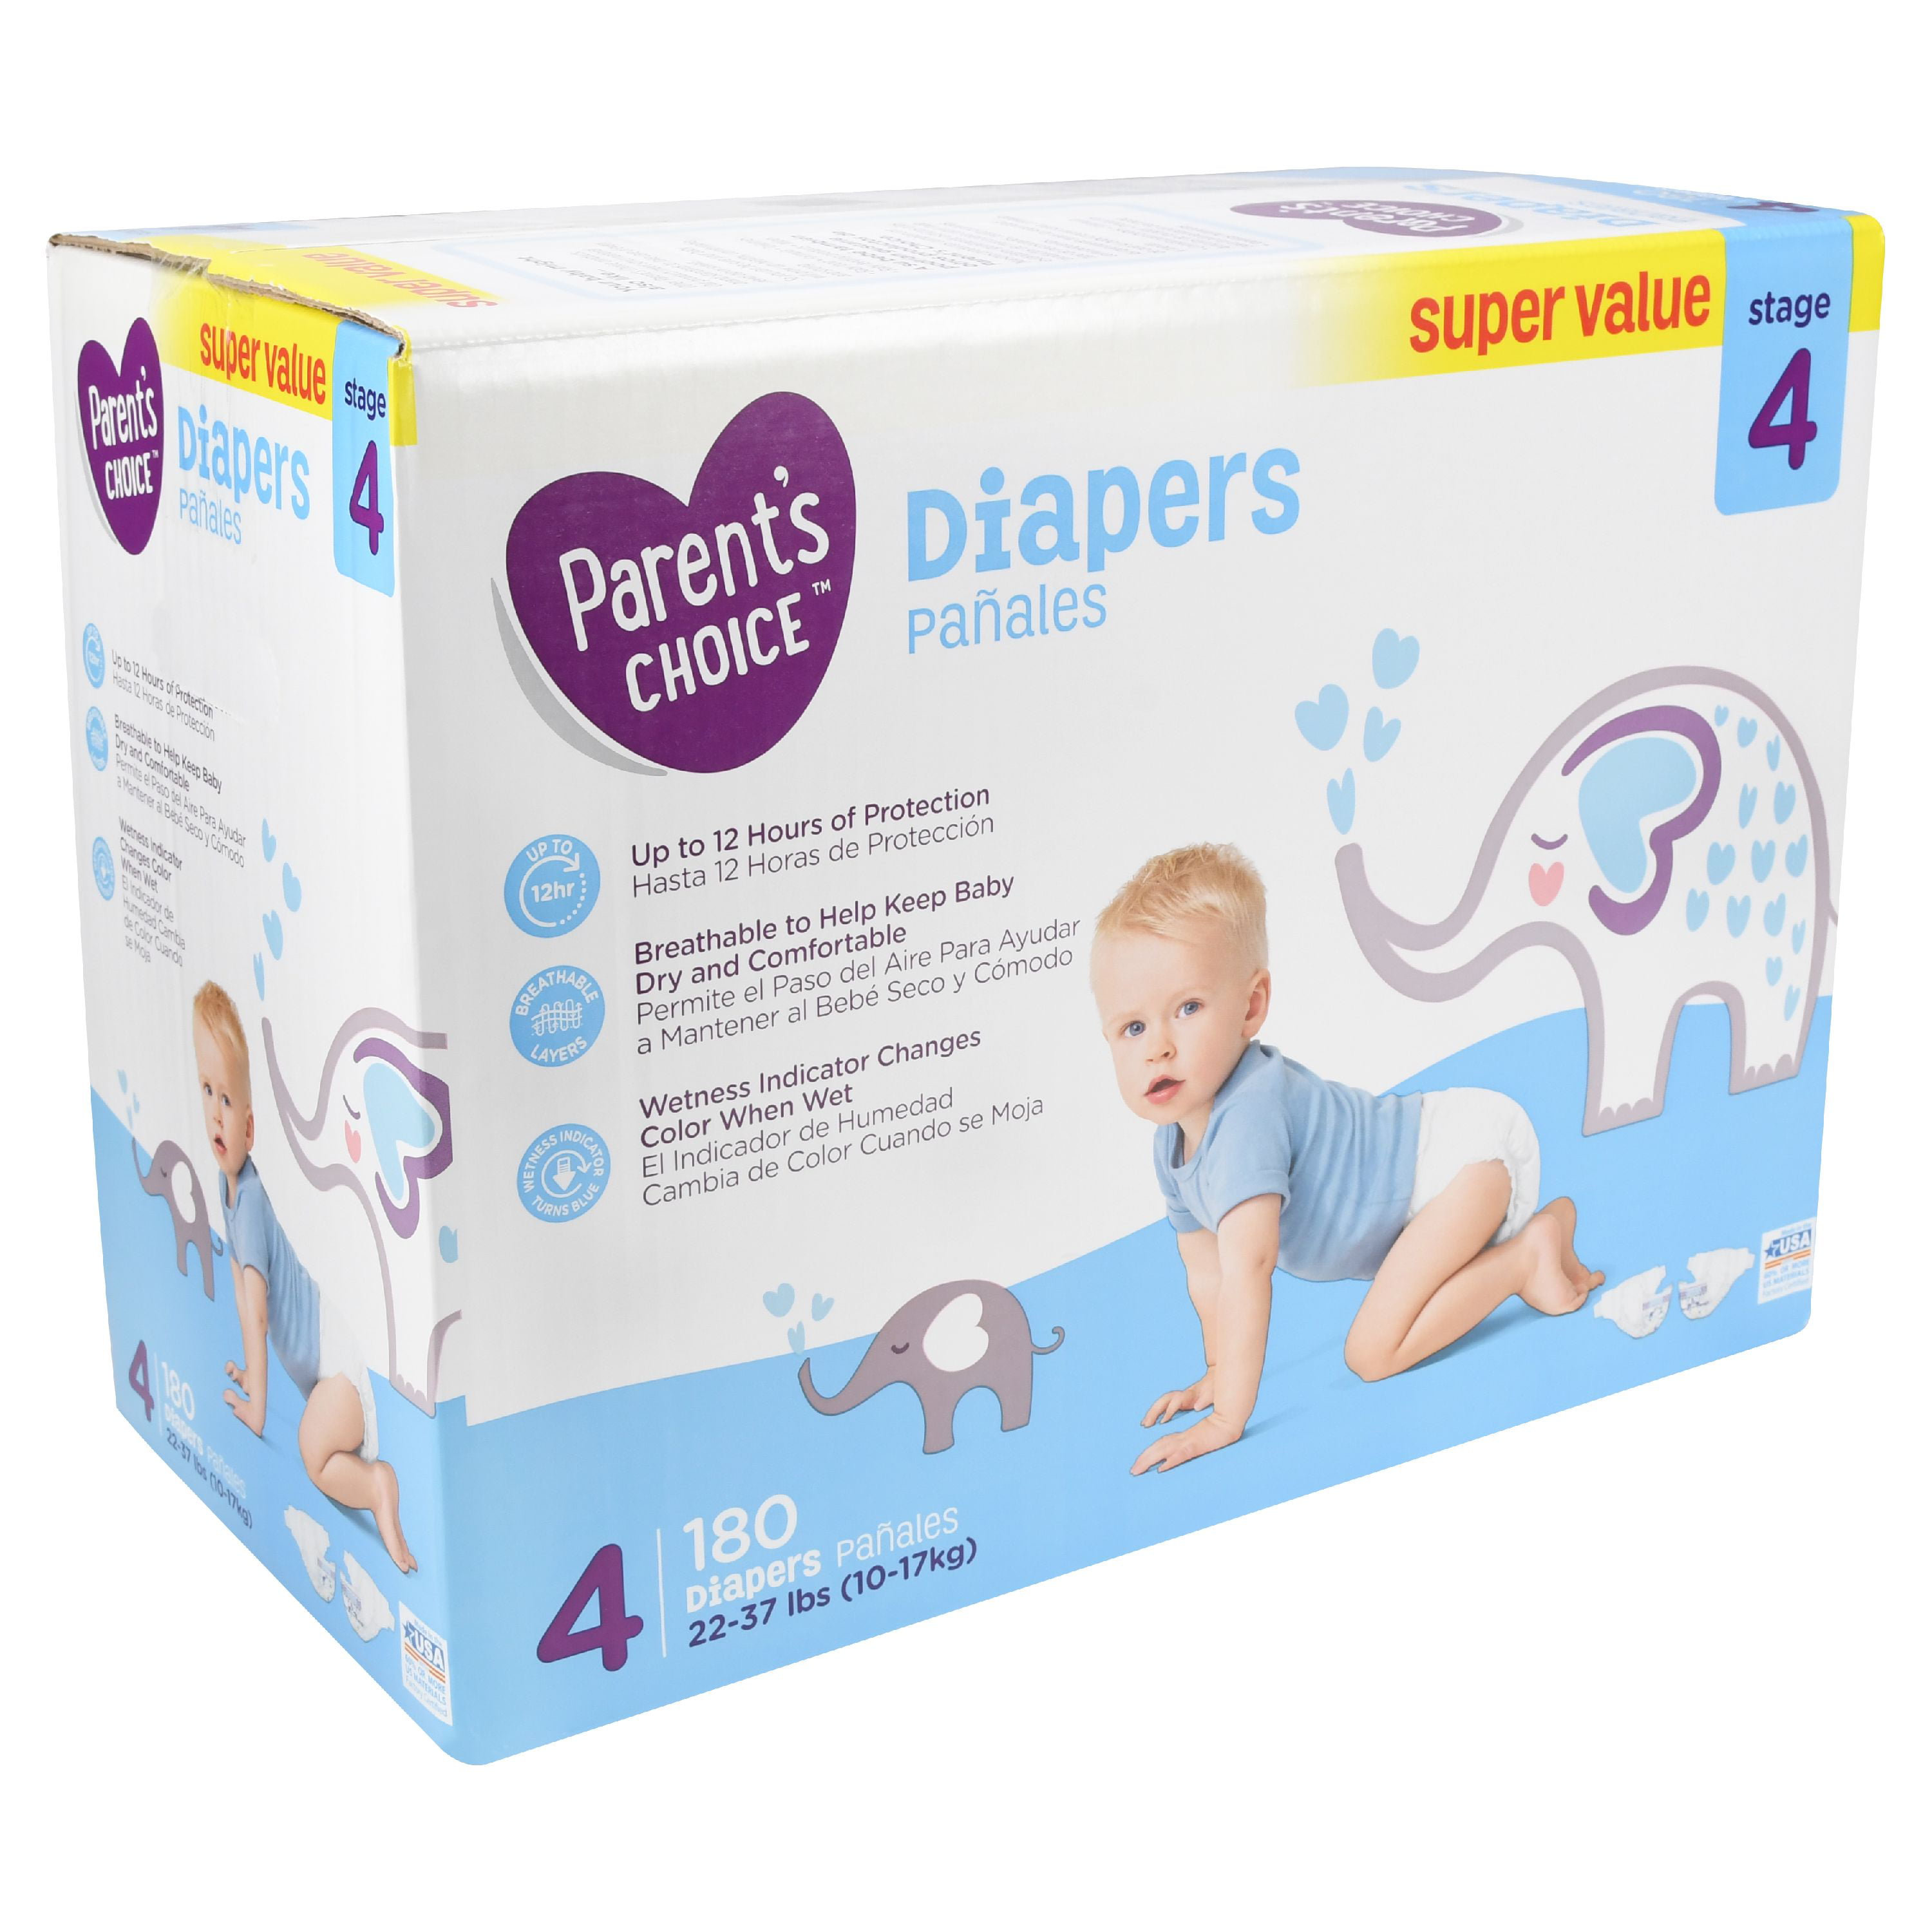 Parent's Choice Diapers, Size 3, 24 Diapers 